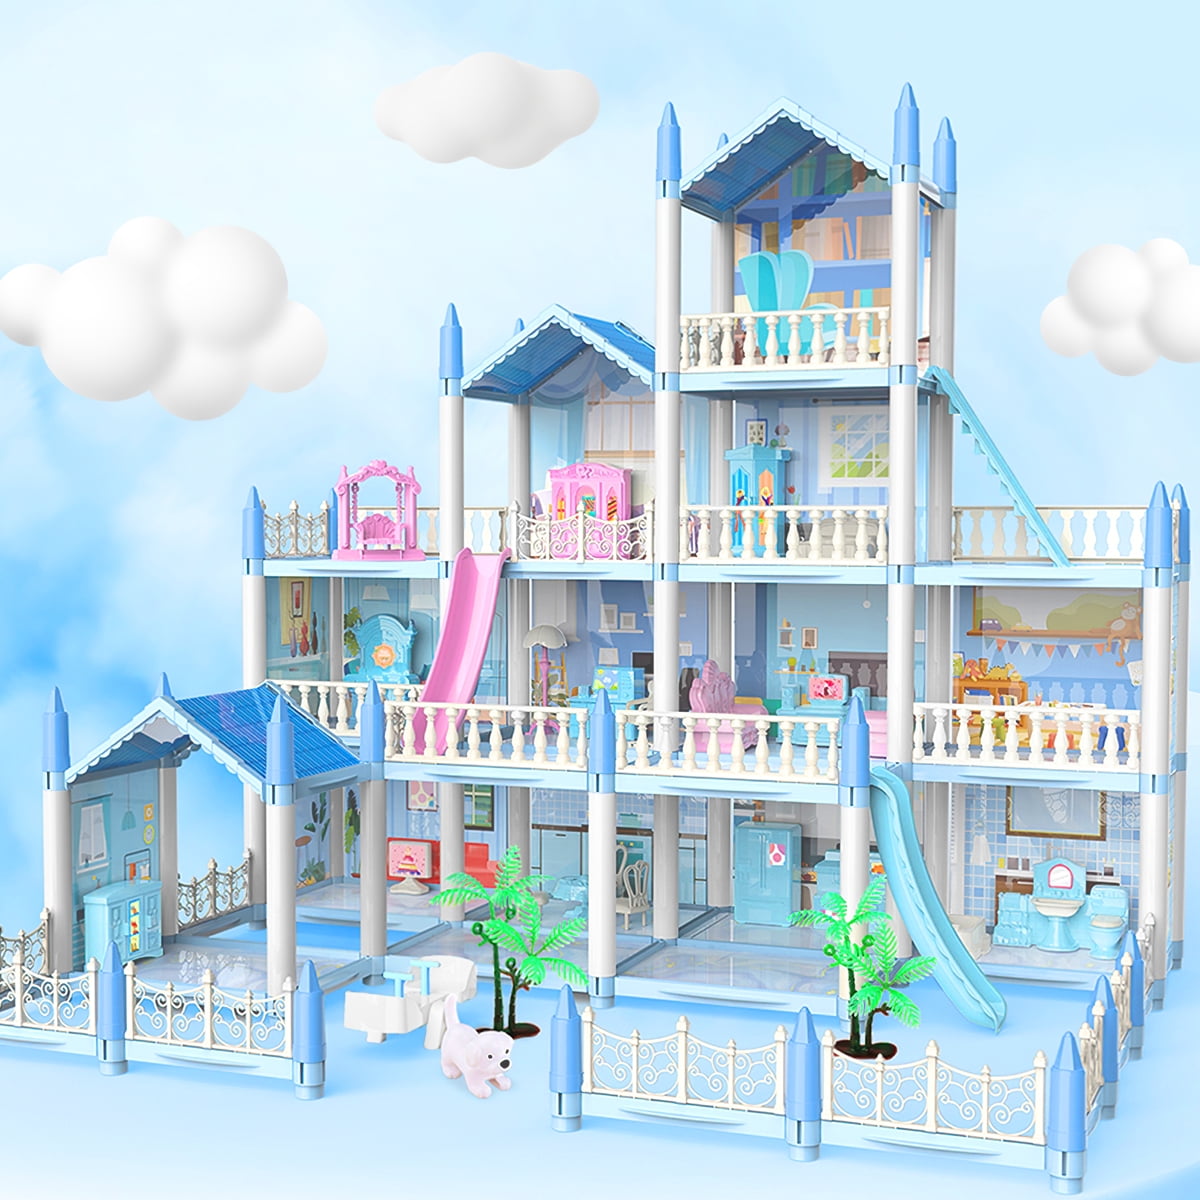  Doll House, Dream House with 11.5 Inch Dolls, 2-Story Dollhouse  w/Plastic Walls, Lights, Stairs, Large Furnitures & Accessories, Playhouse  Dreamhouse Gift for 3 to 12 Year Olds Girls Kids : Toys